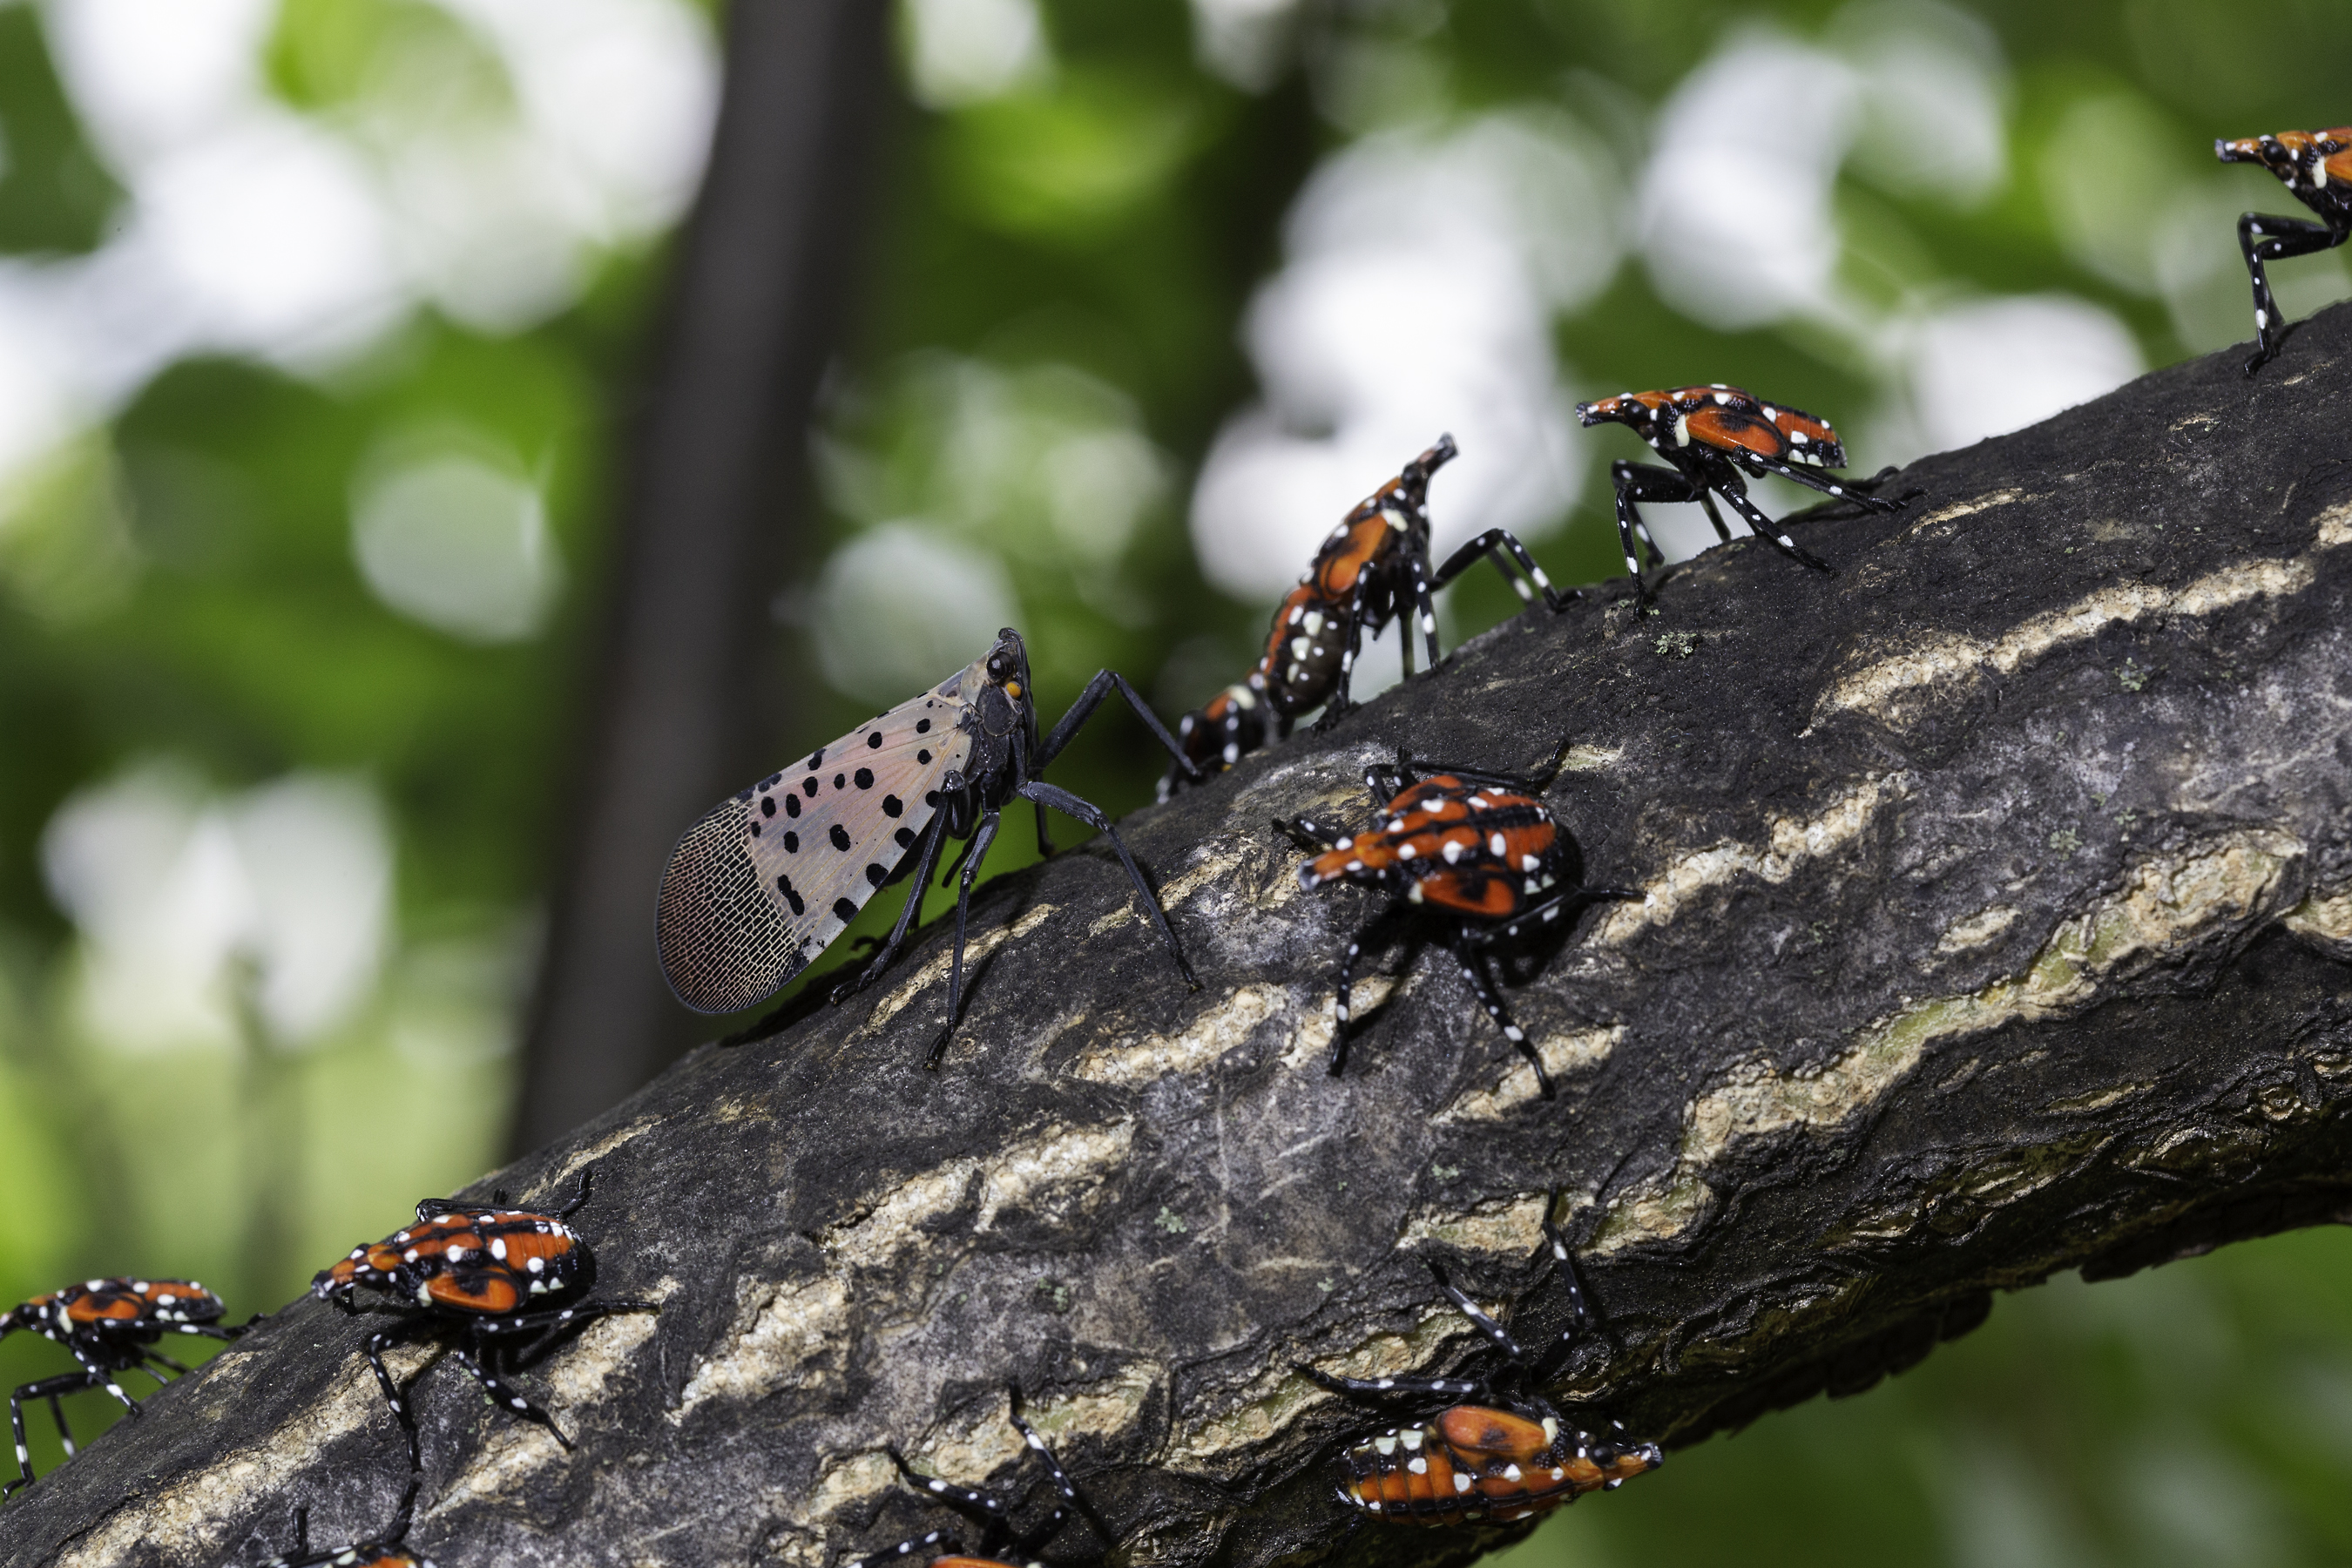 Image of an adult spotted lanternfly with red-and-white nymphs. Photo by Steve Ausmus, USDA/ARS.